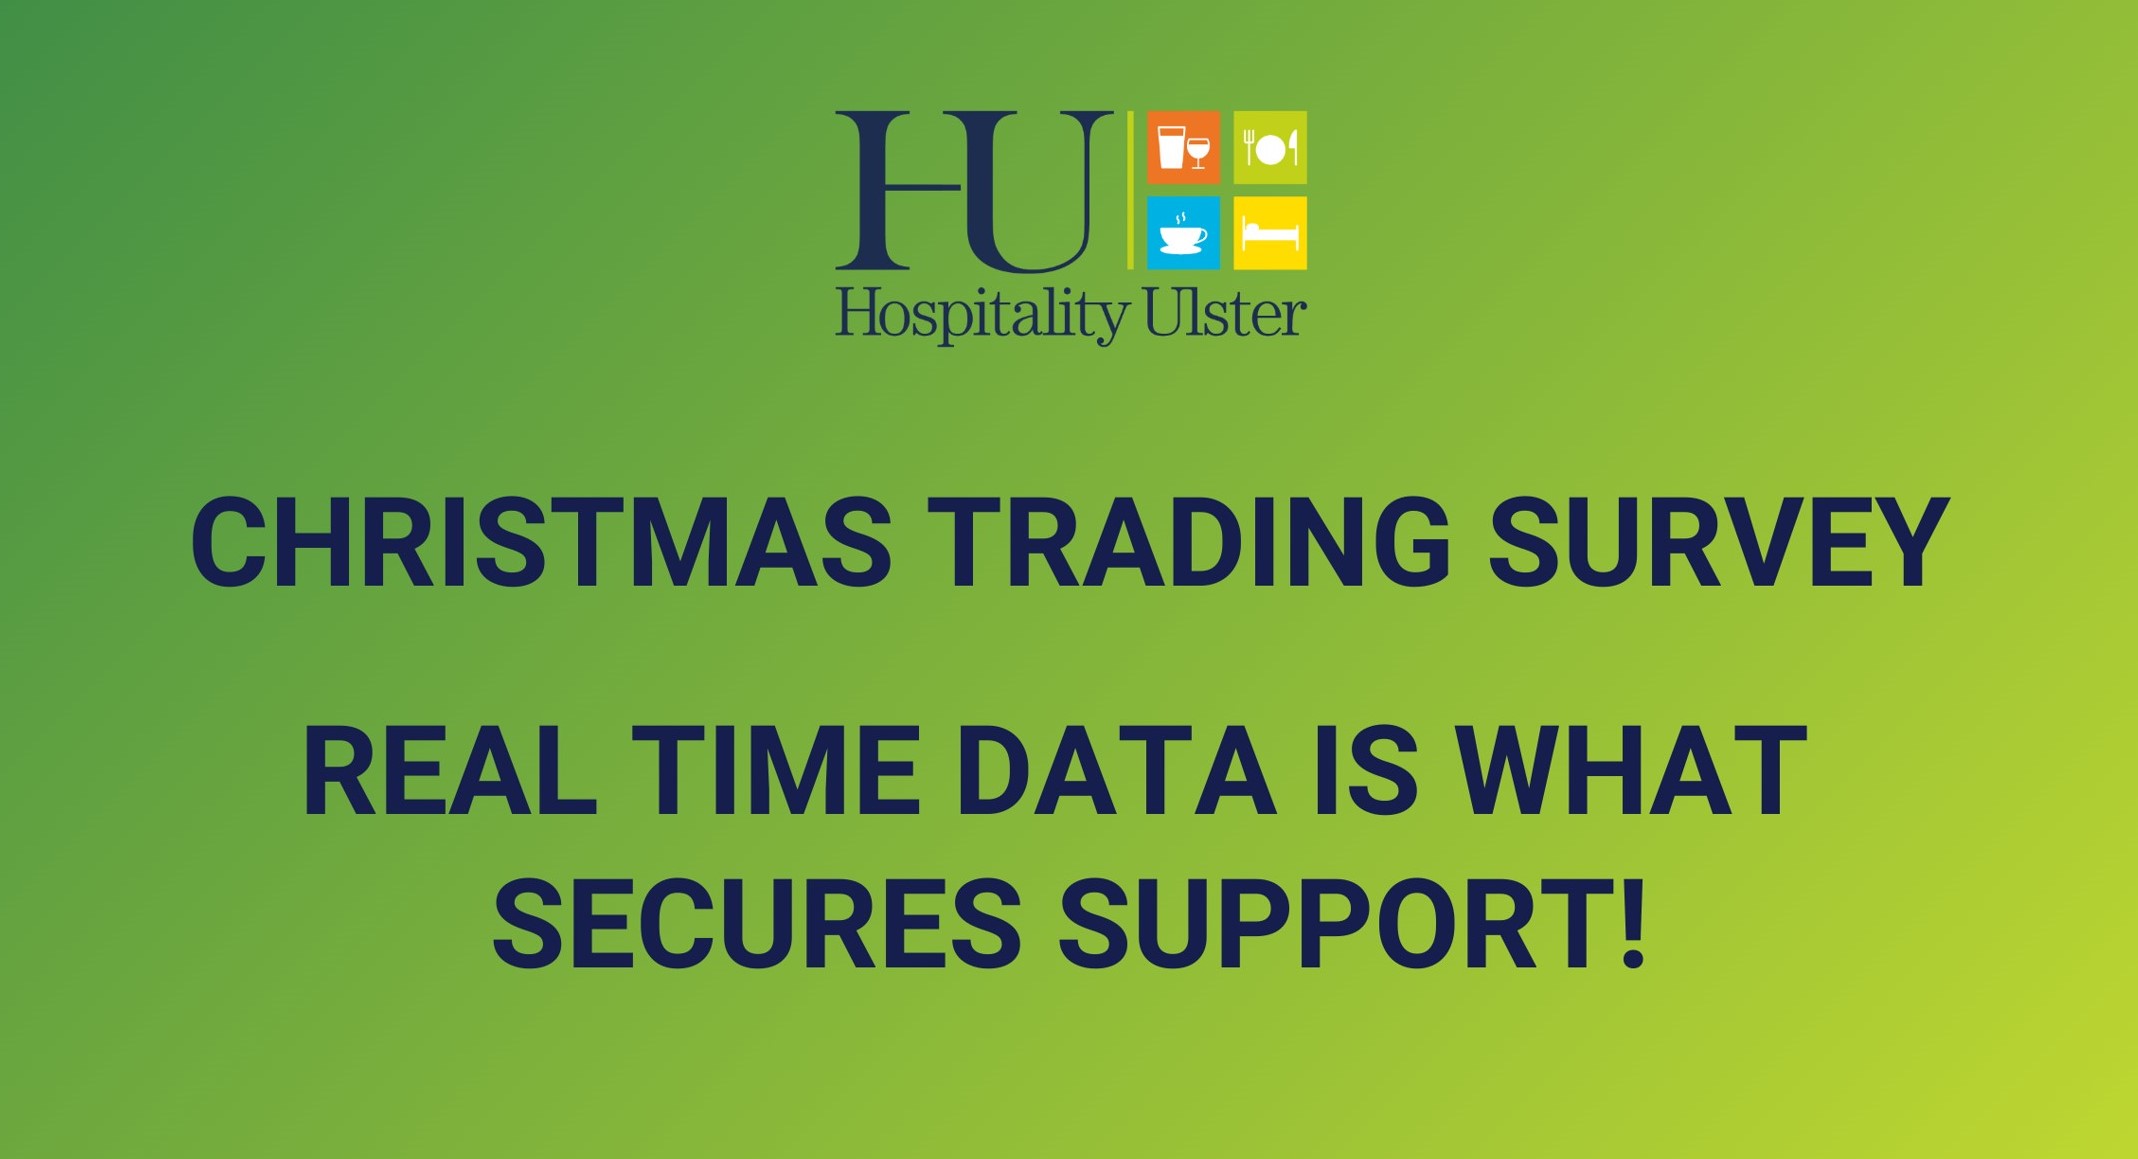 CHRISTMAS TRADING SURVEY - REAL TIME DATA IS WHAT SECURES SUPPORT